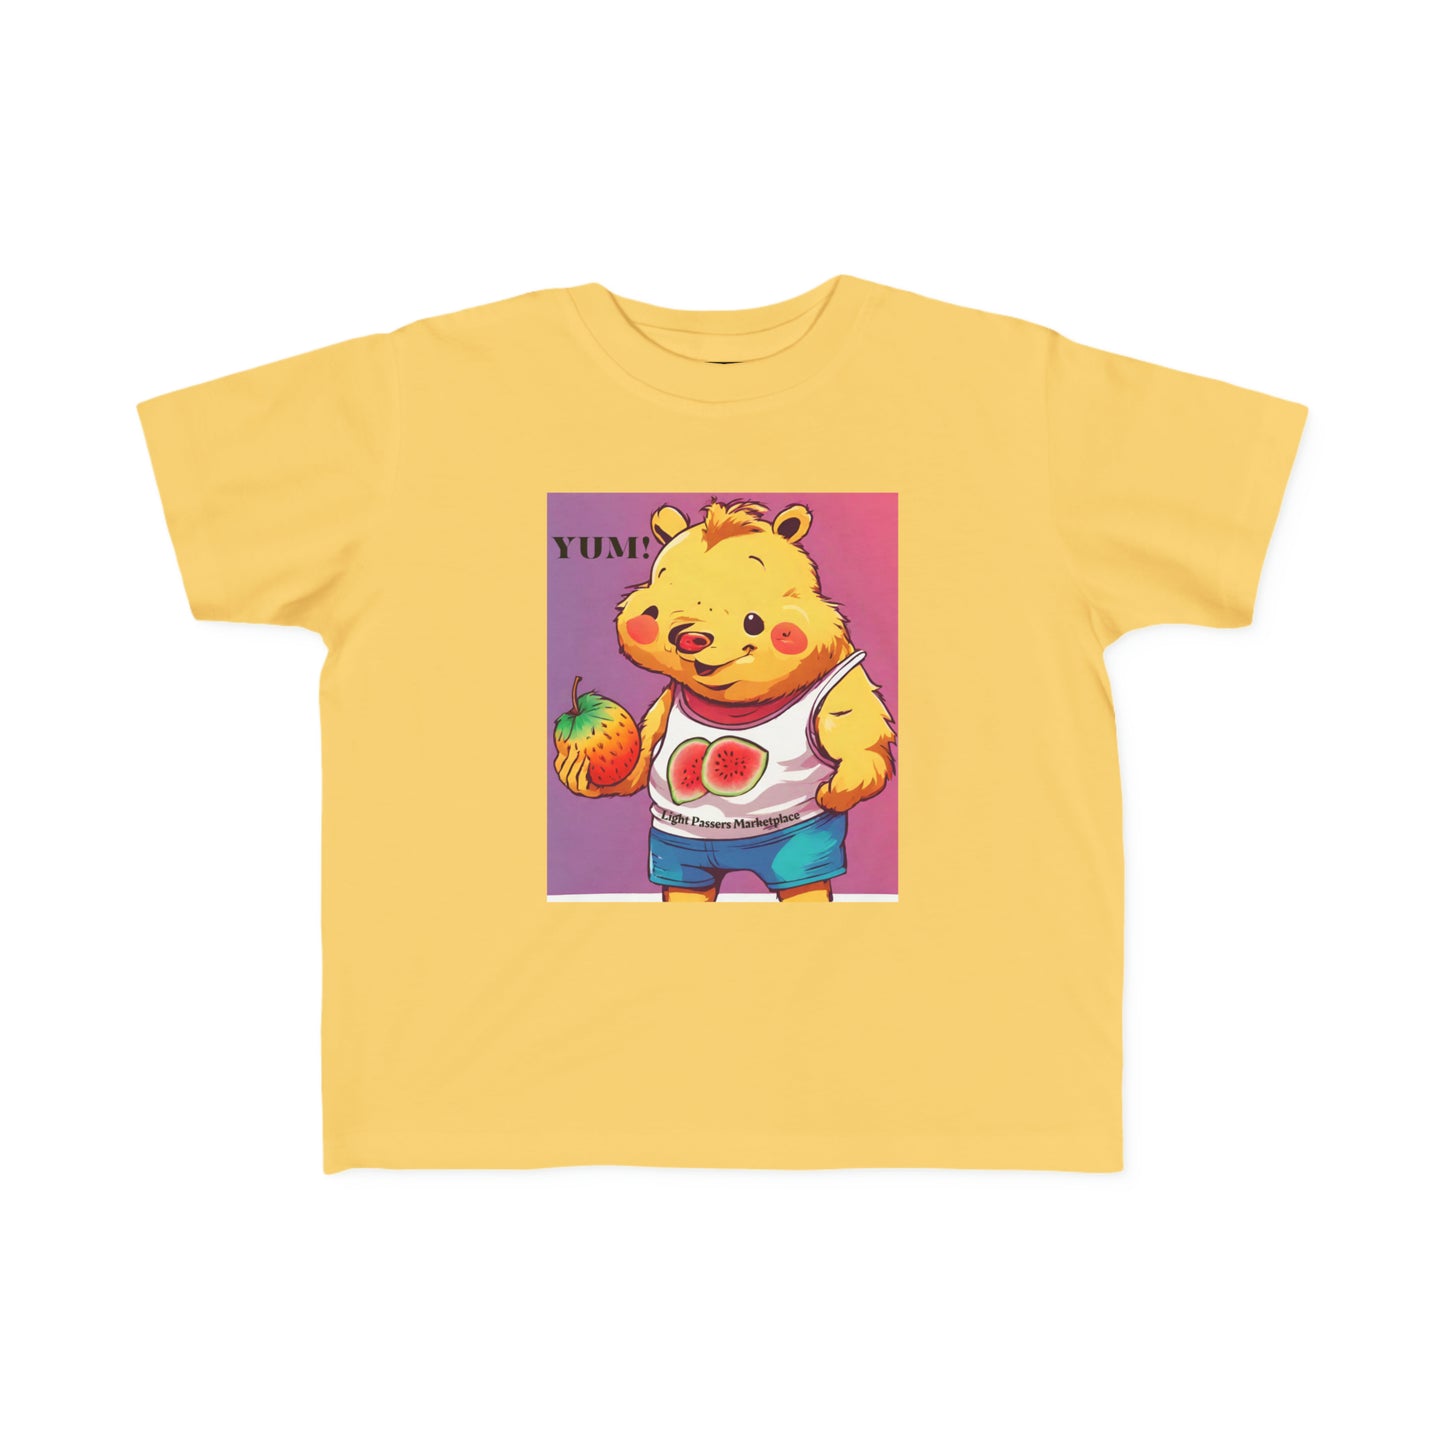 Light Passers Marketplace Yum Strawberries Toddler Fine T-shirt Nutrition, Fitness